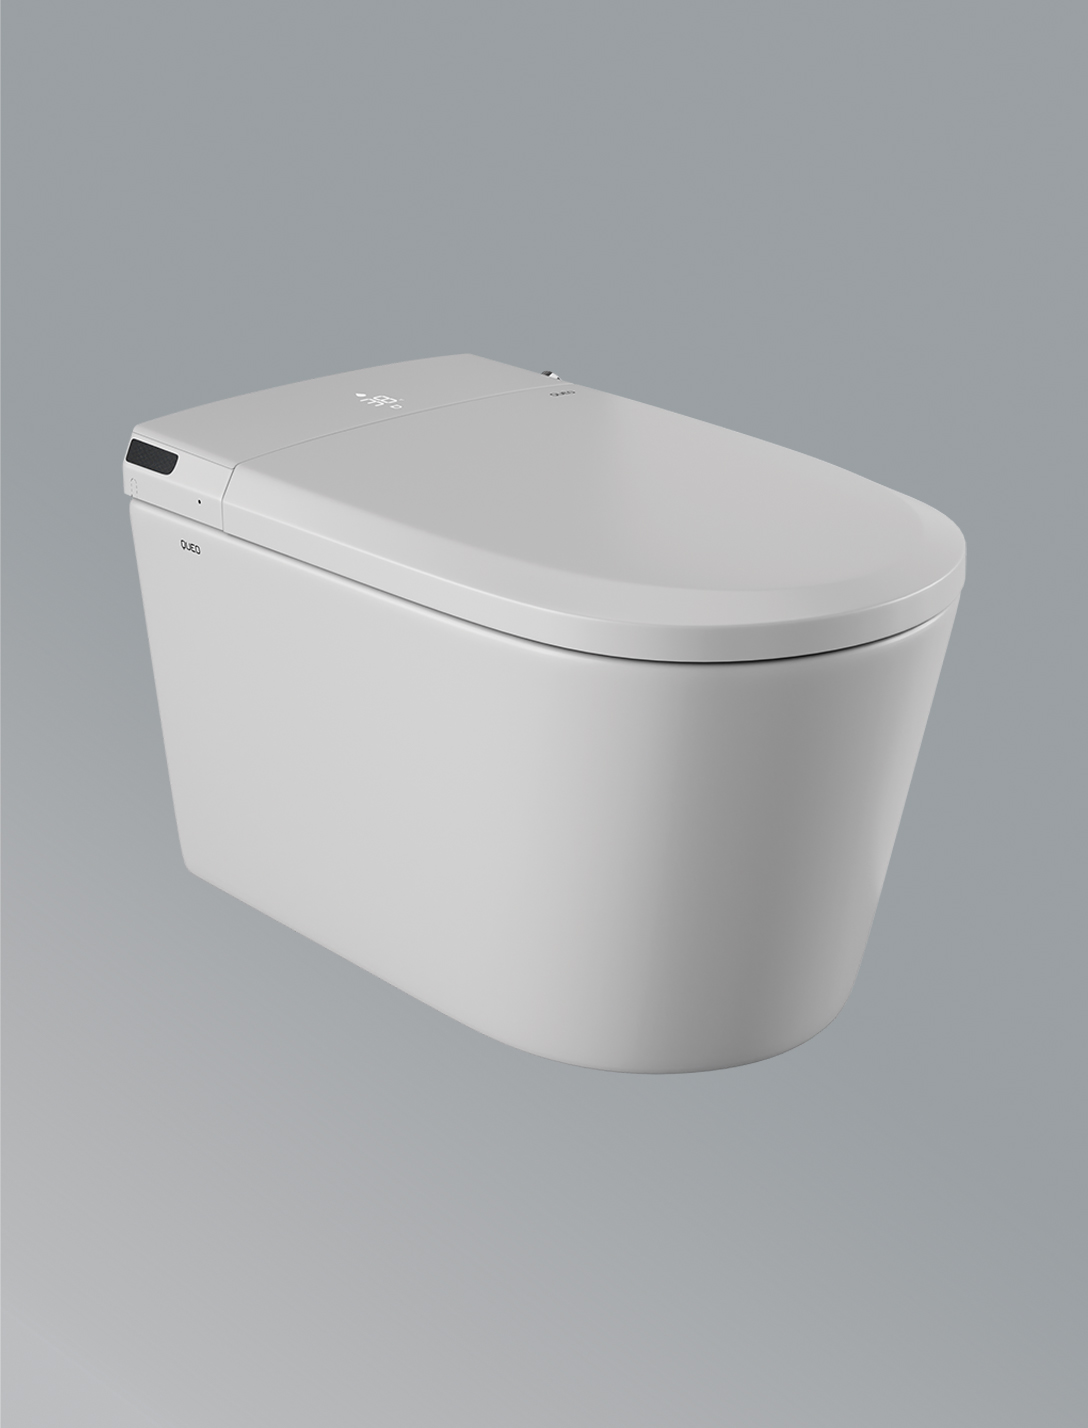 wall-hung-smart-toilet-with-remote-soft-close-seat-in-white